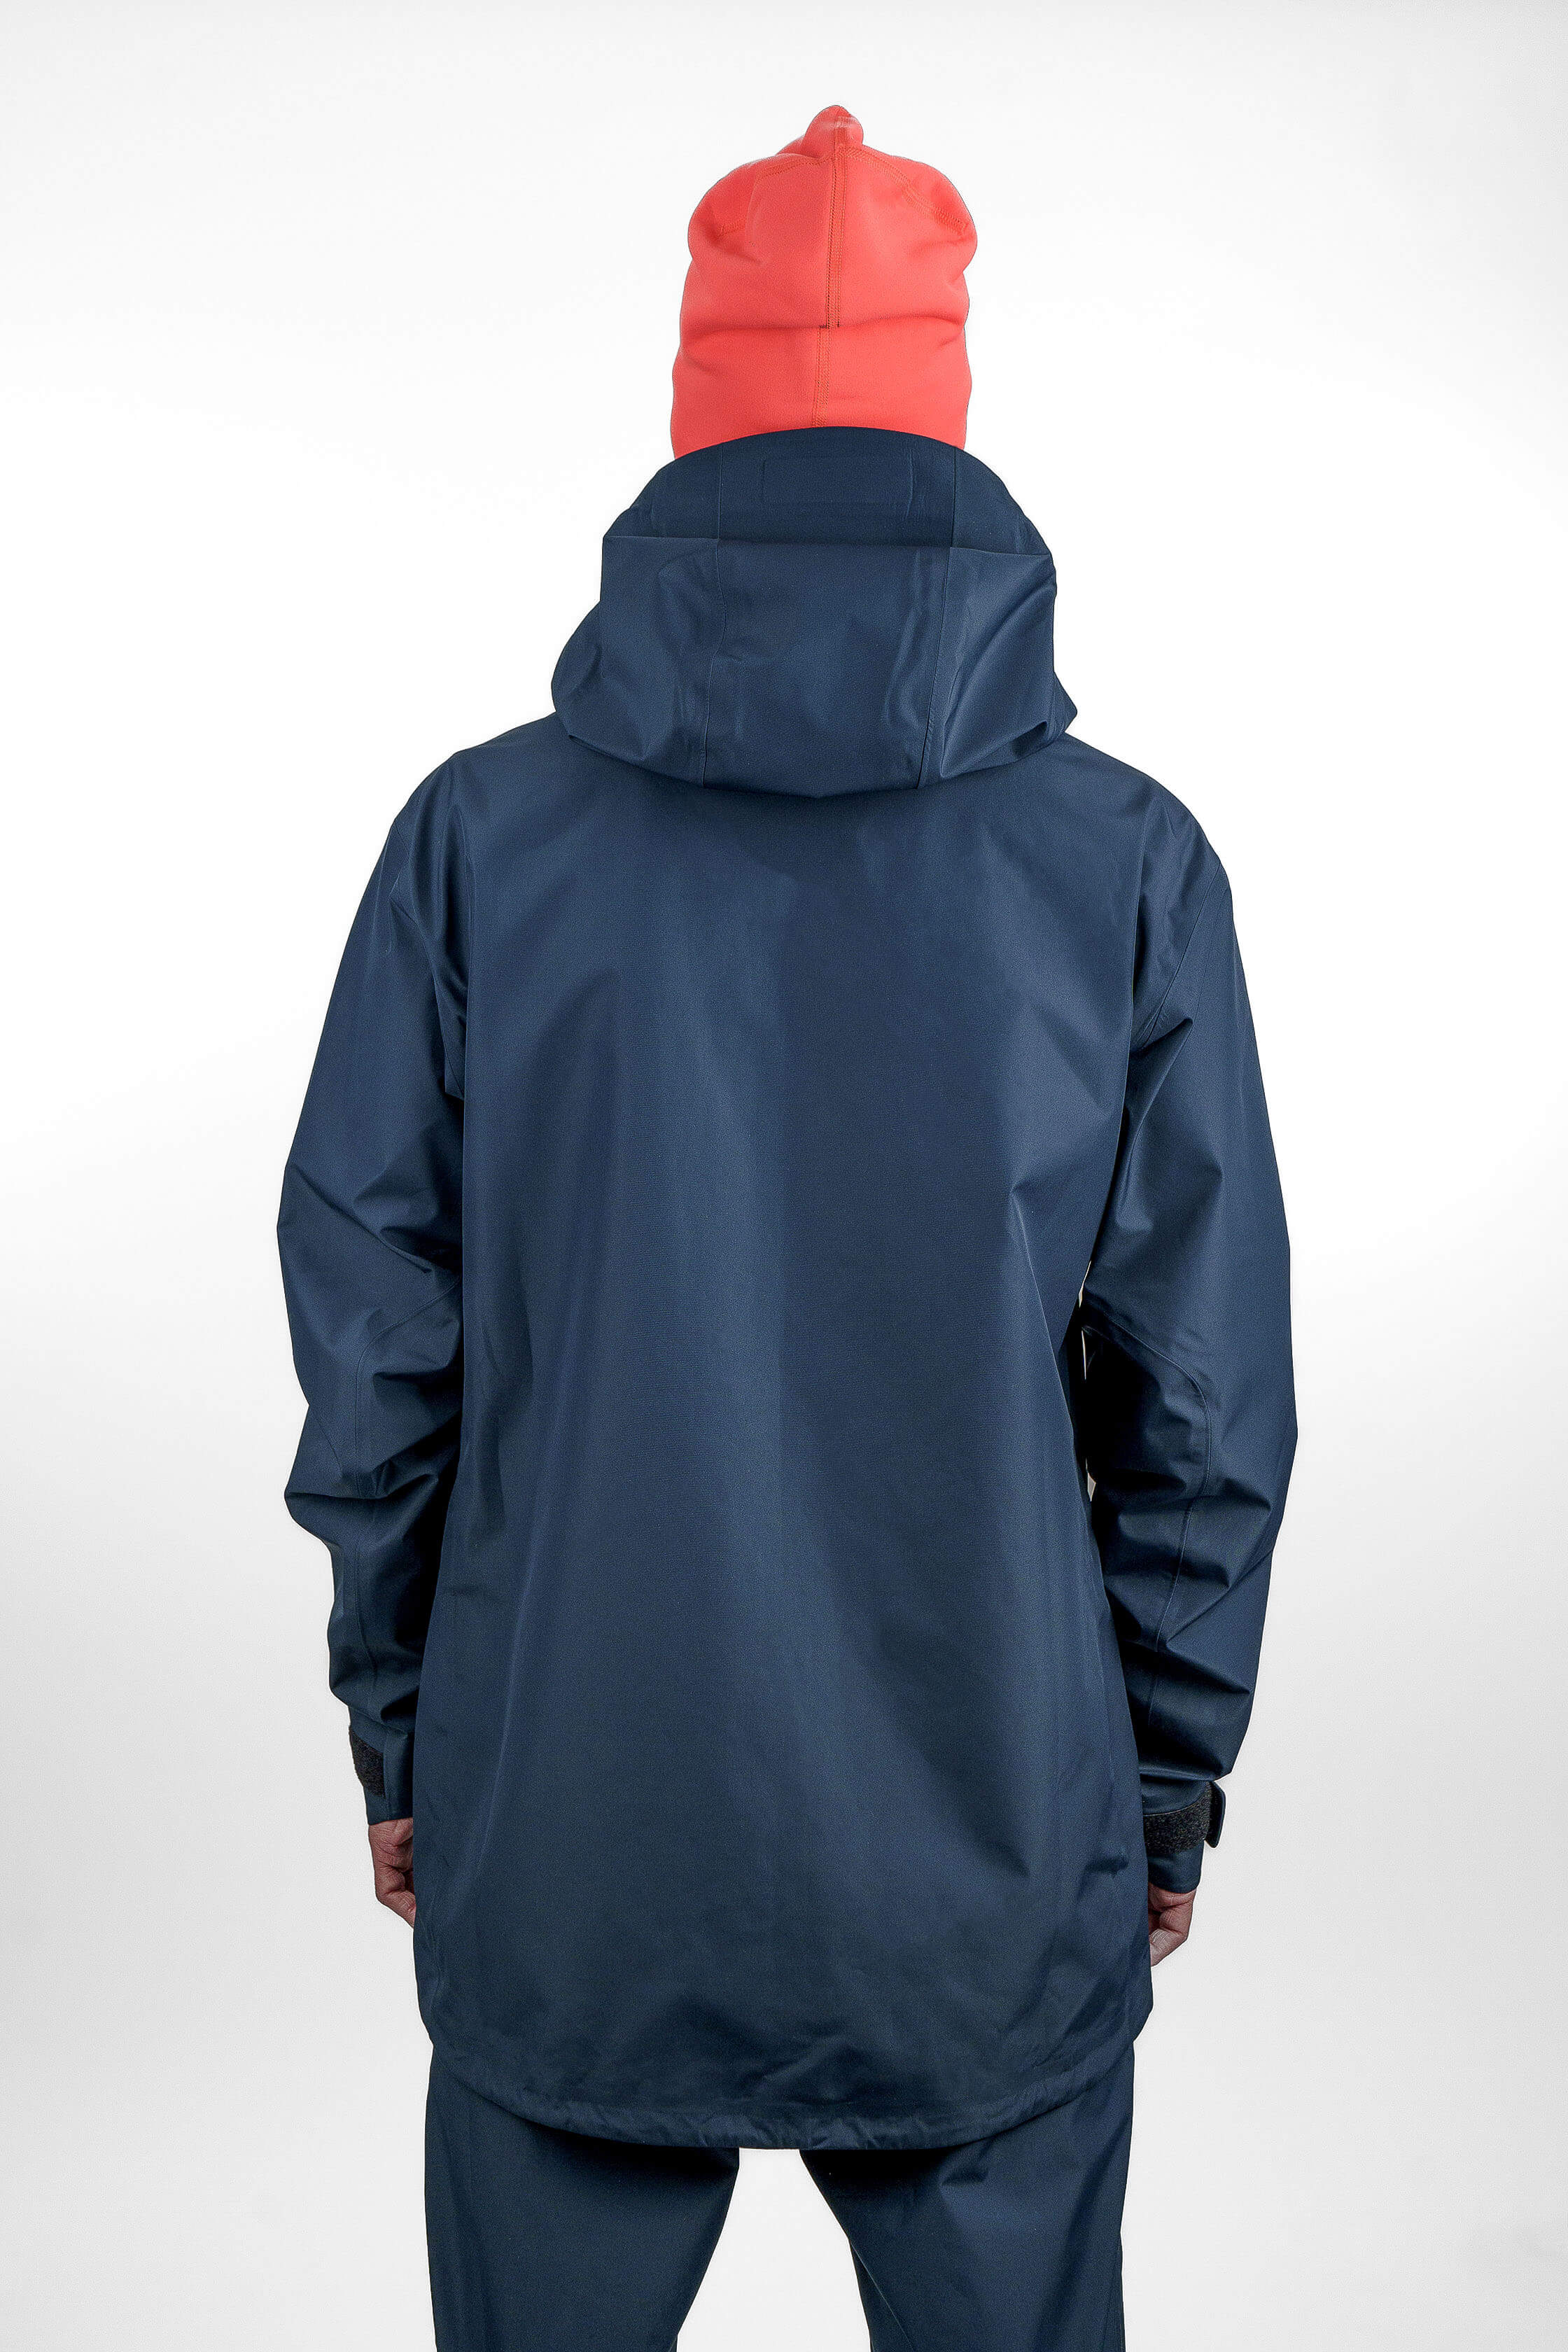 Blue hardshell jacket in unisex sizing - back view of the Arctic Legacy Nuka Elements 3 layer Jacket#color_total-eclipse